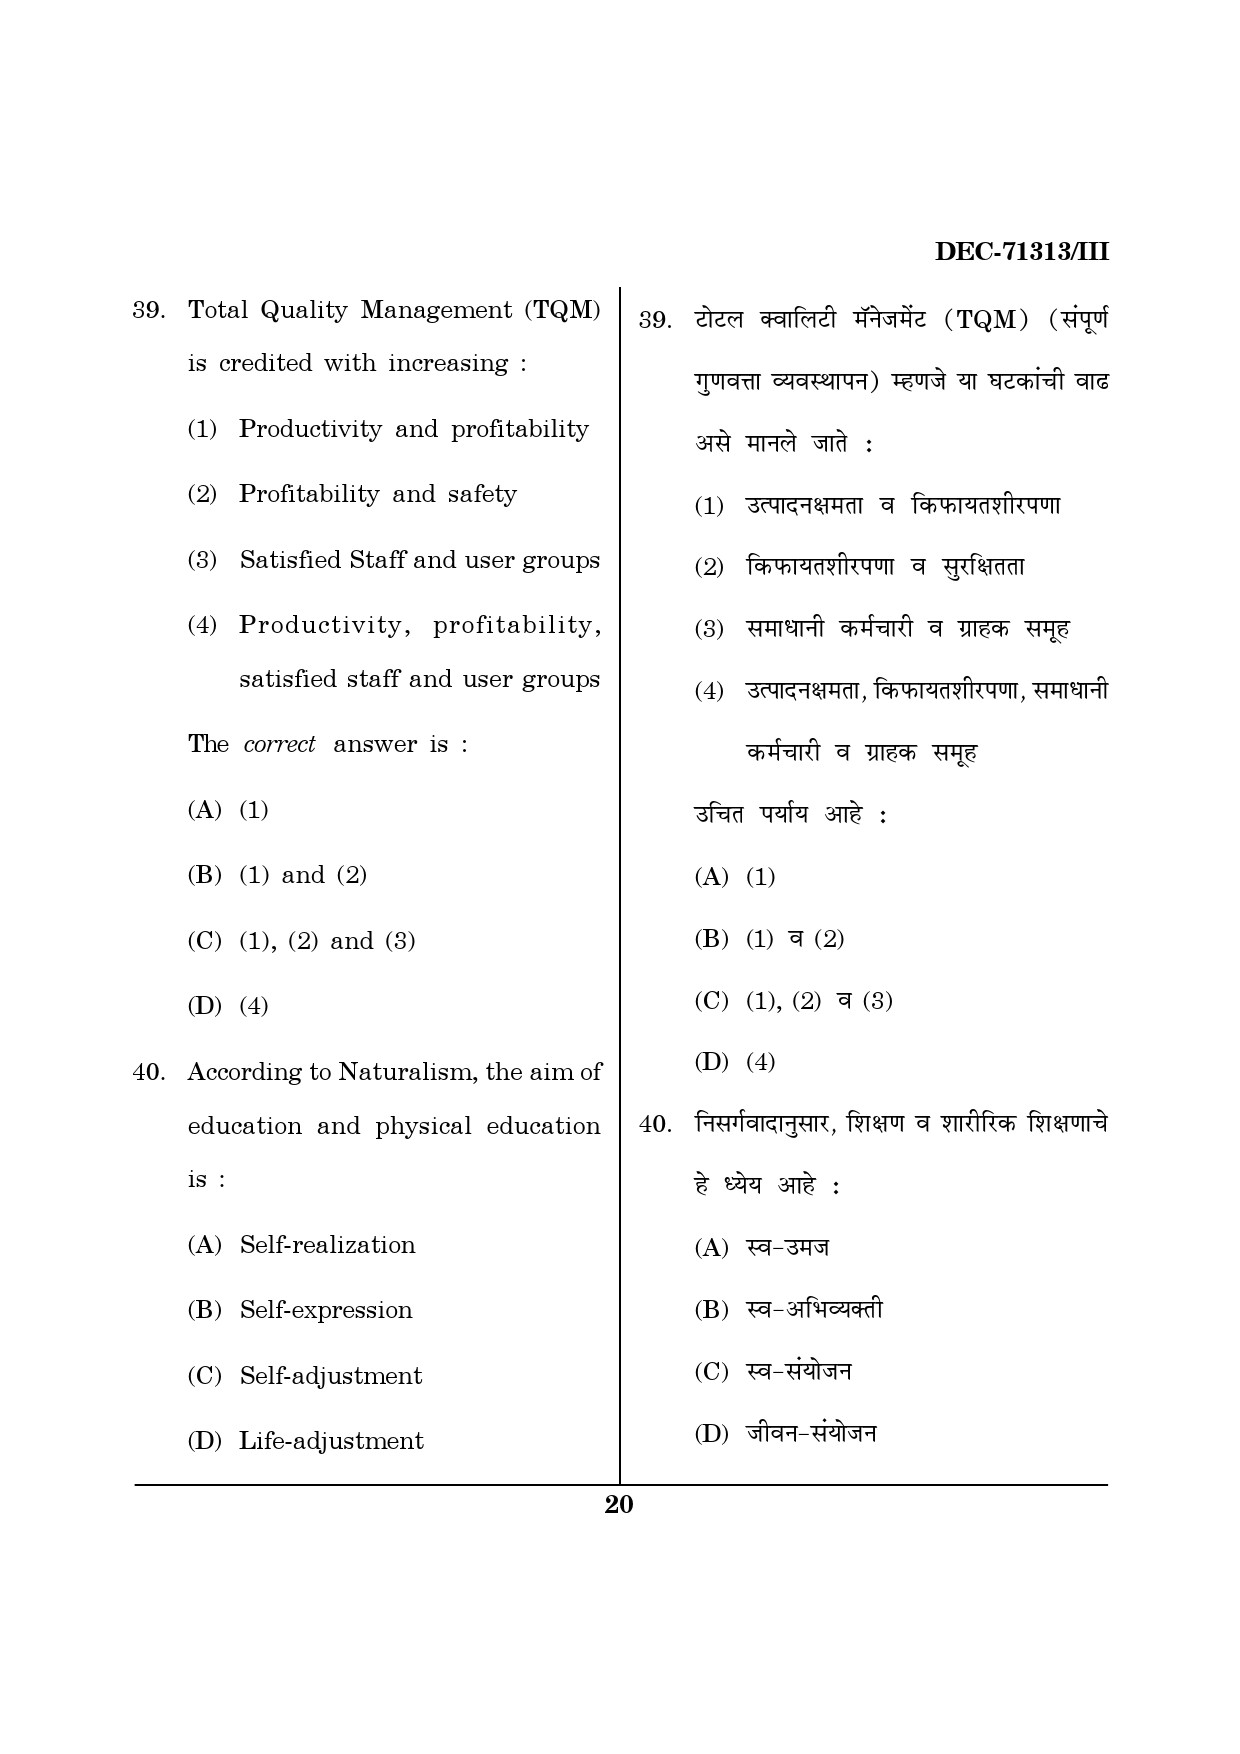 Maharashtra SET Physical Education Question Paper III December 2013 19